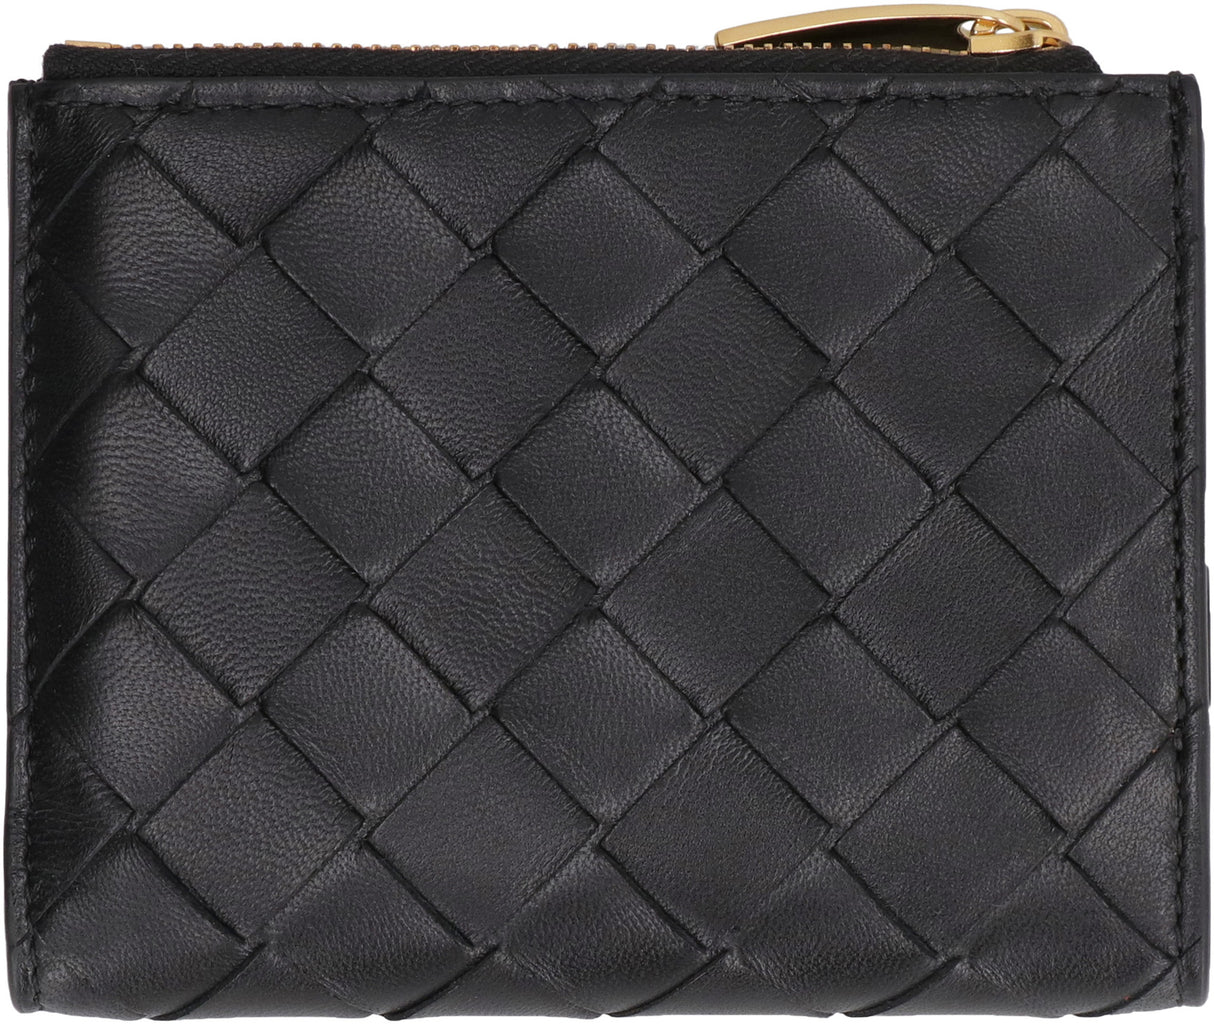 Classic Black Leather Wallet with Intrecciato Motif and Multiple Compartments for Women